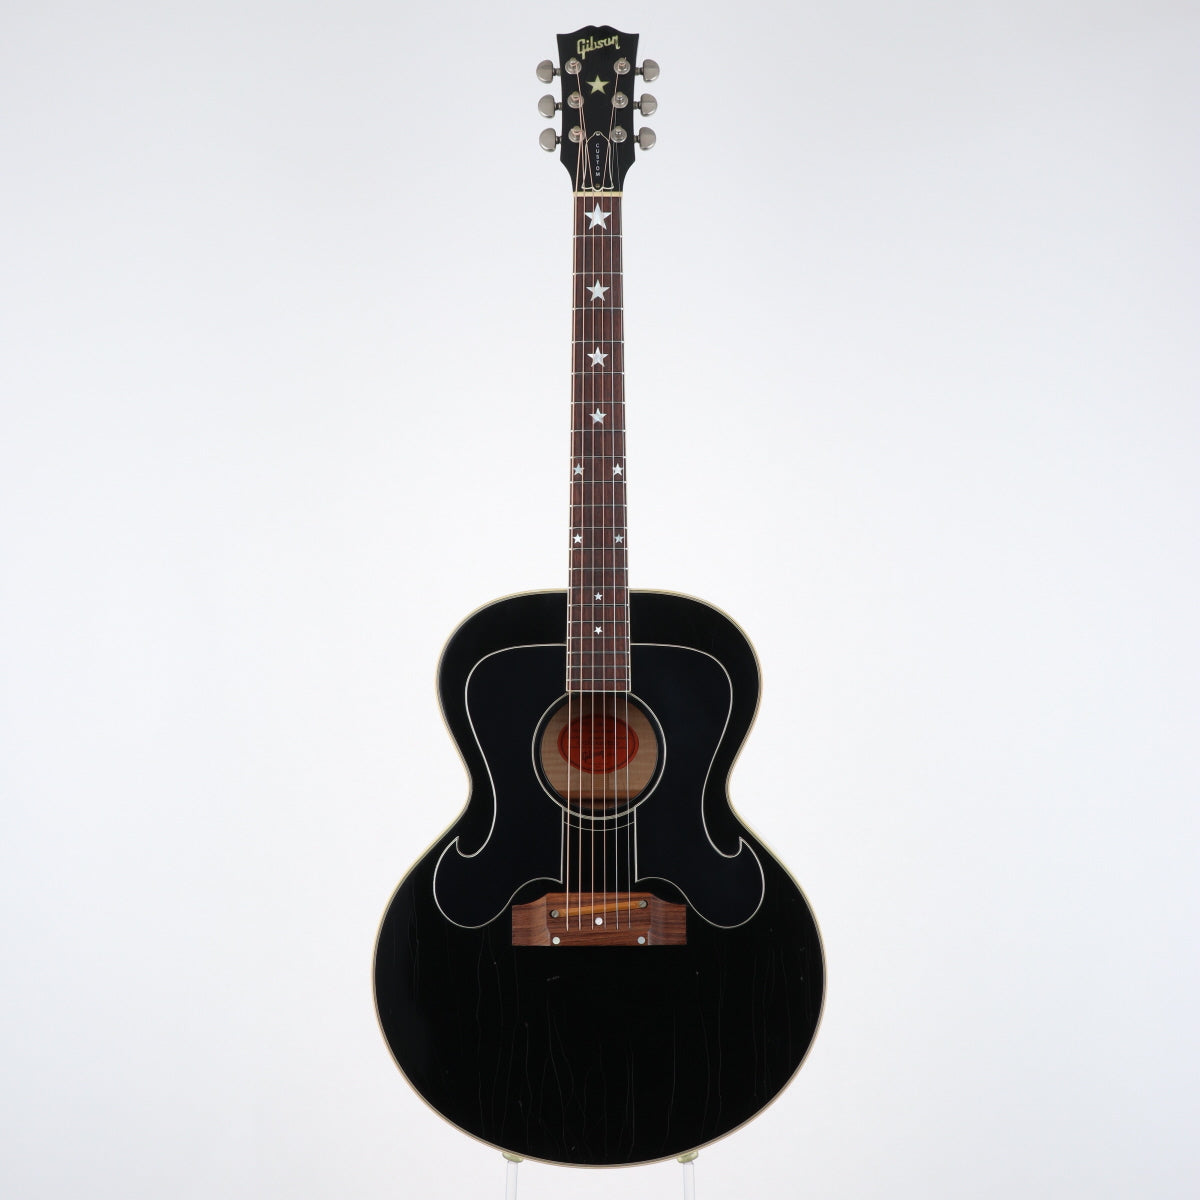 [SN 92096007] USED Gibson / 1968 Everly Brothers Ressu J-180 EB 1996 [12]